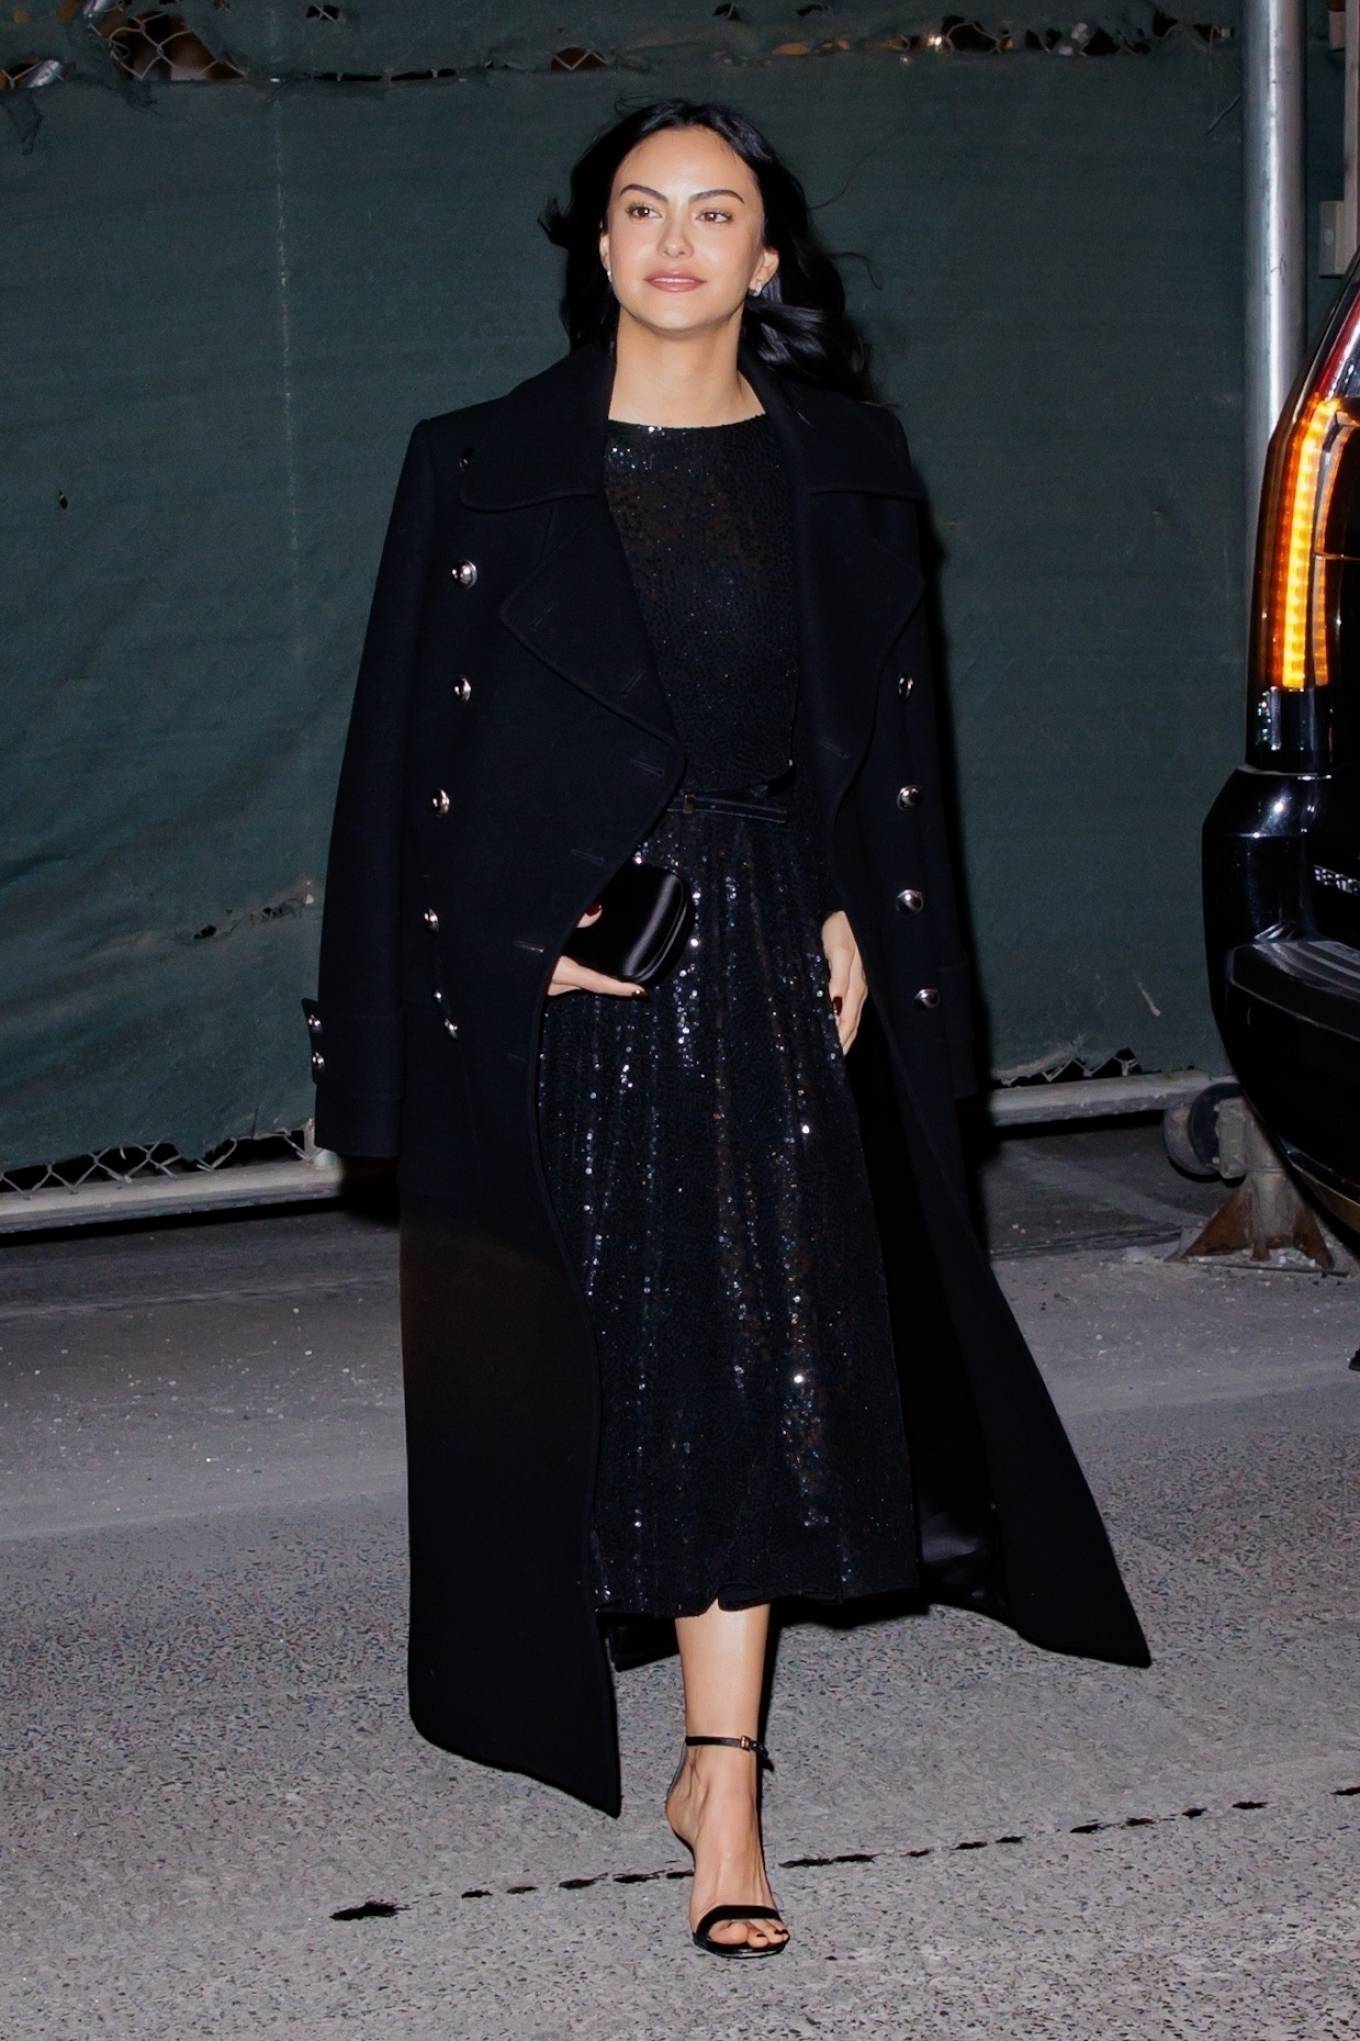 Camila Mendes 2022 : Camila Mendes – In all black arrives to the Michael Kors fashion show during NYFW-04